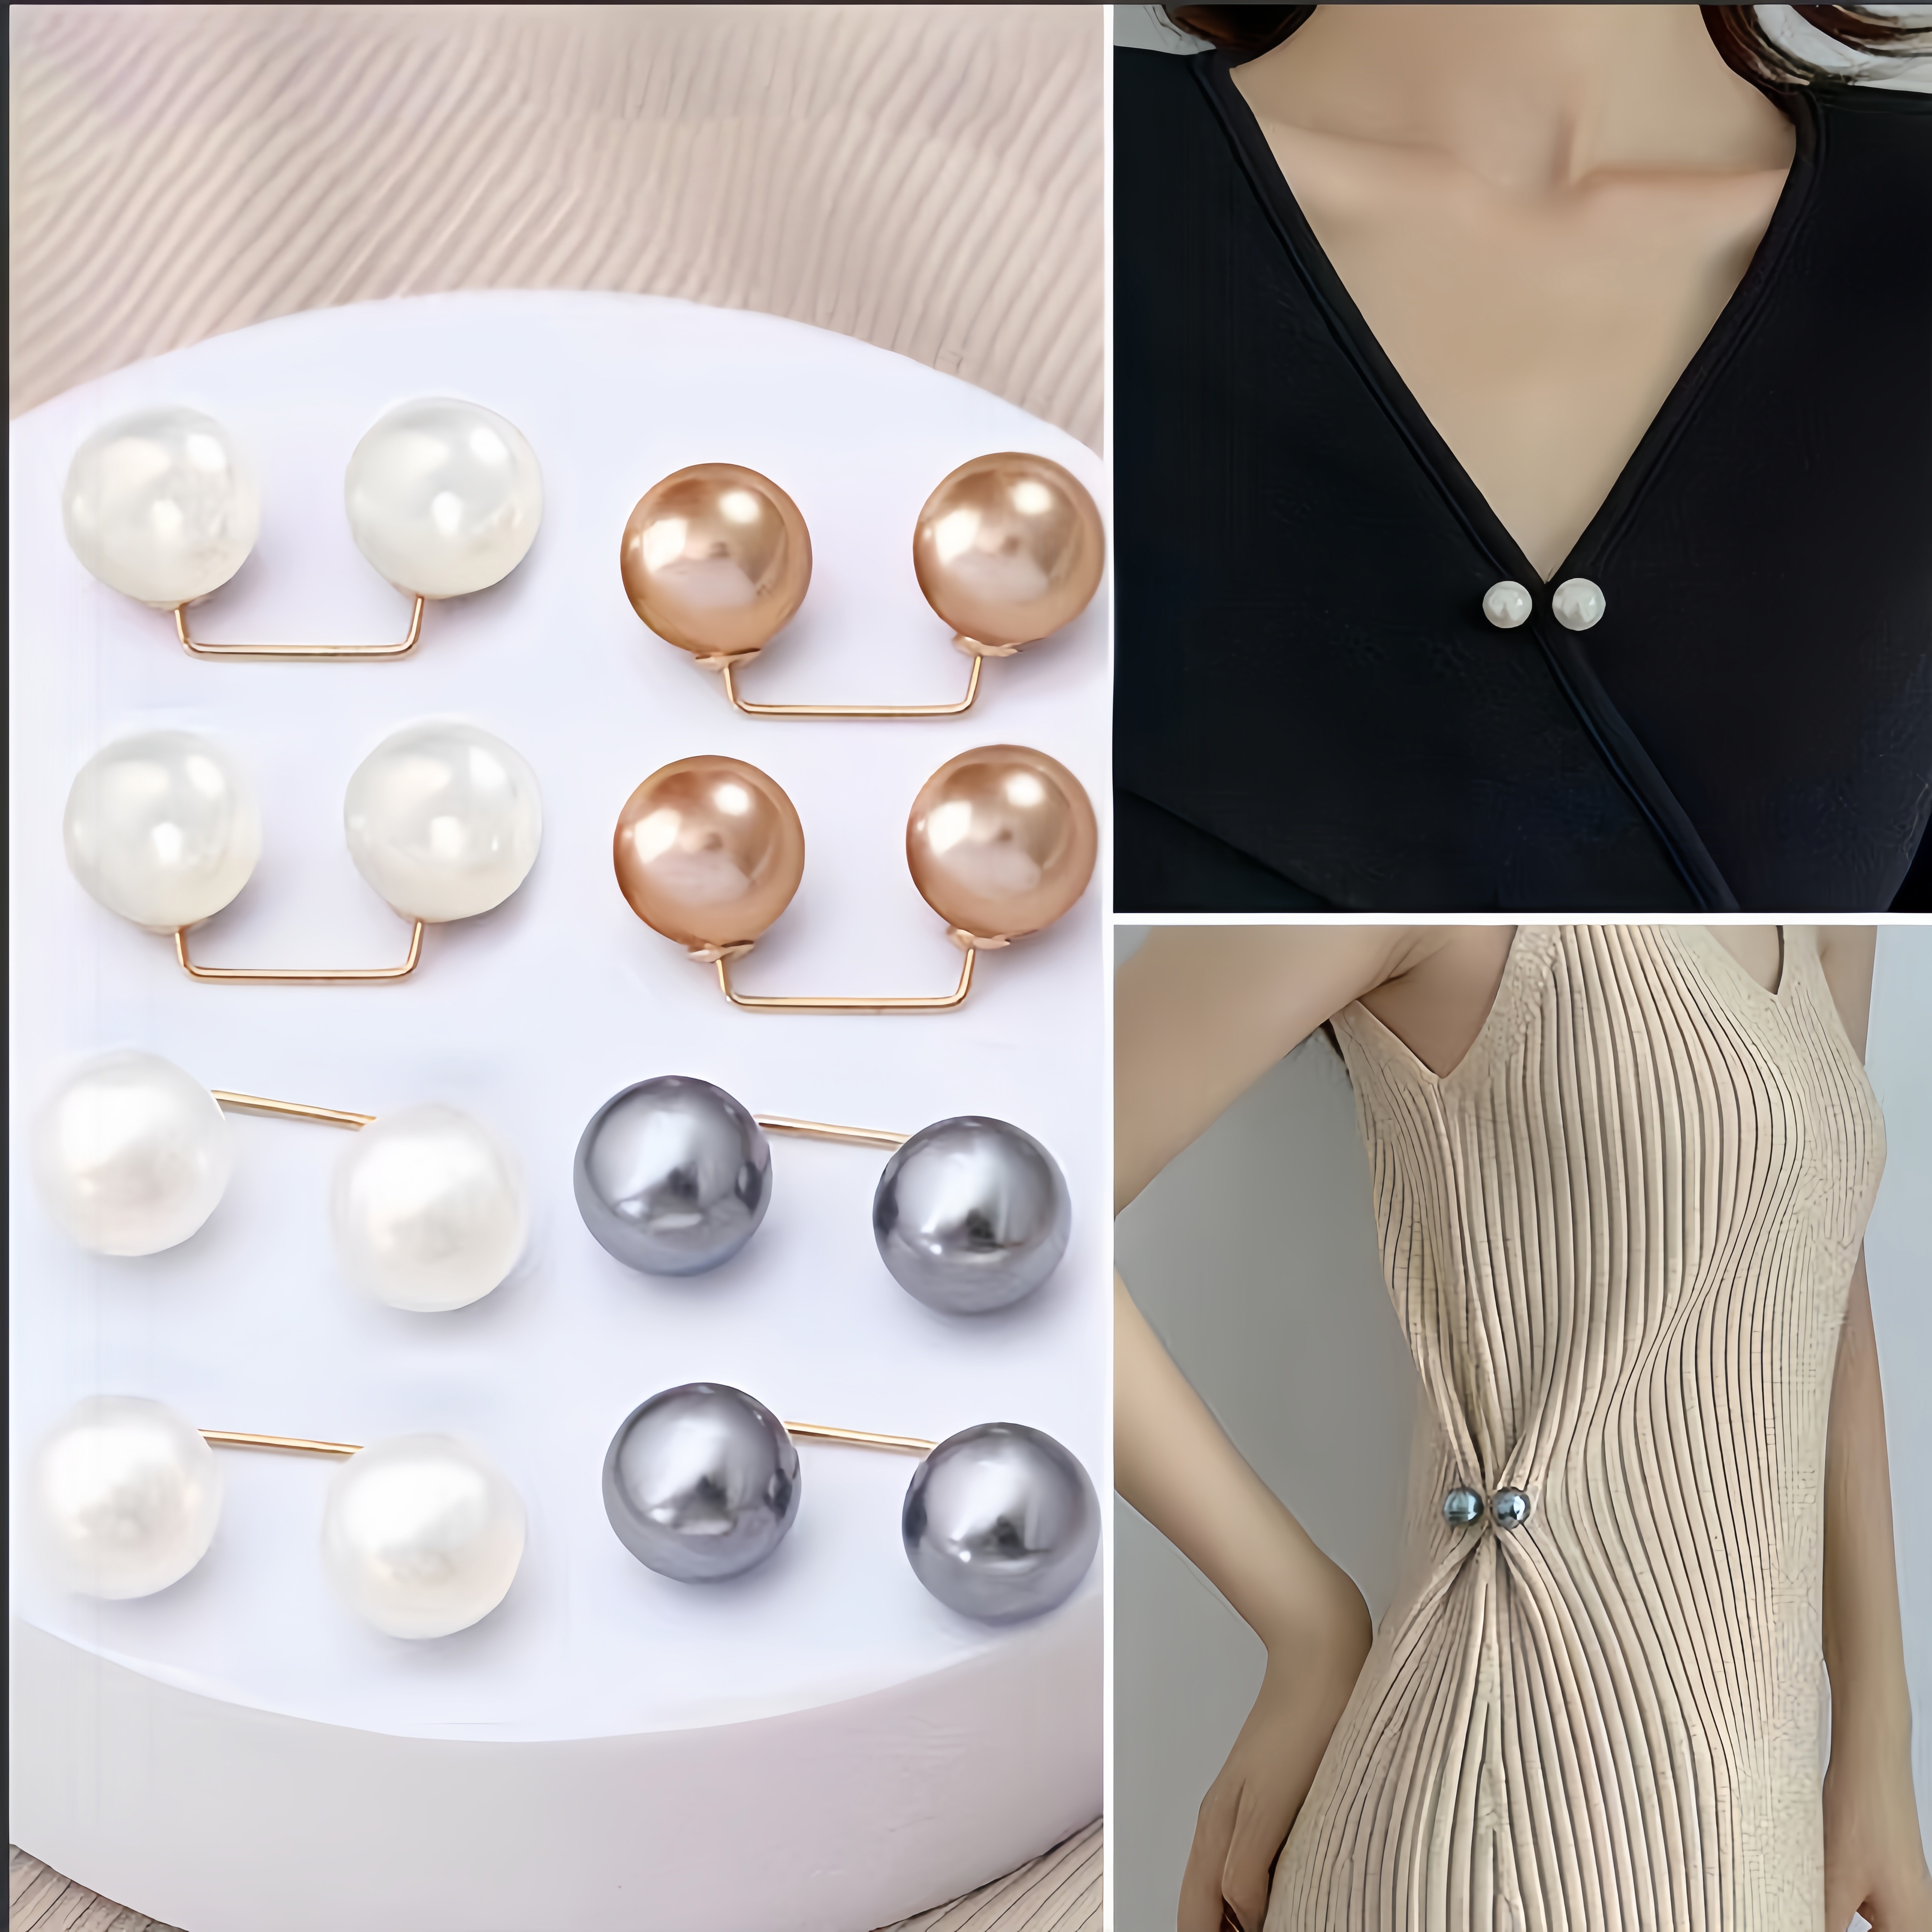 

8pcs Pearl Brooch Clothing, Non-slip Safety Pin Dress Waist Tighten, Collar Adjustment, Scarf Safety, Fashion Accessories, Imitation Pearl Buttons